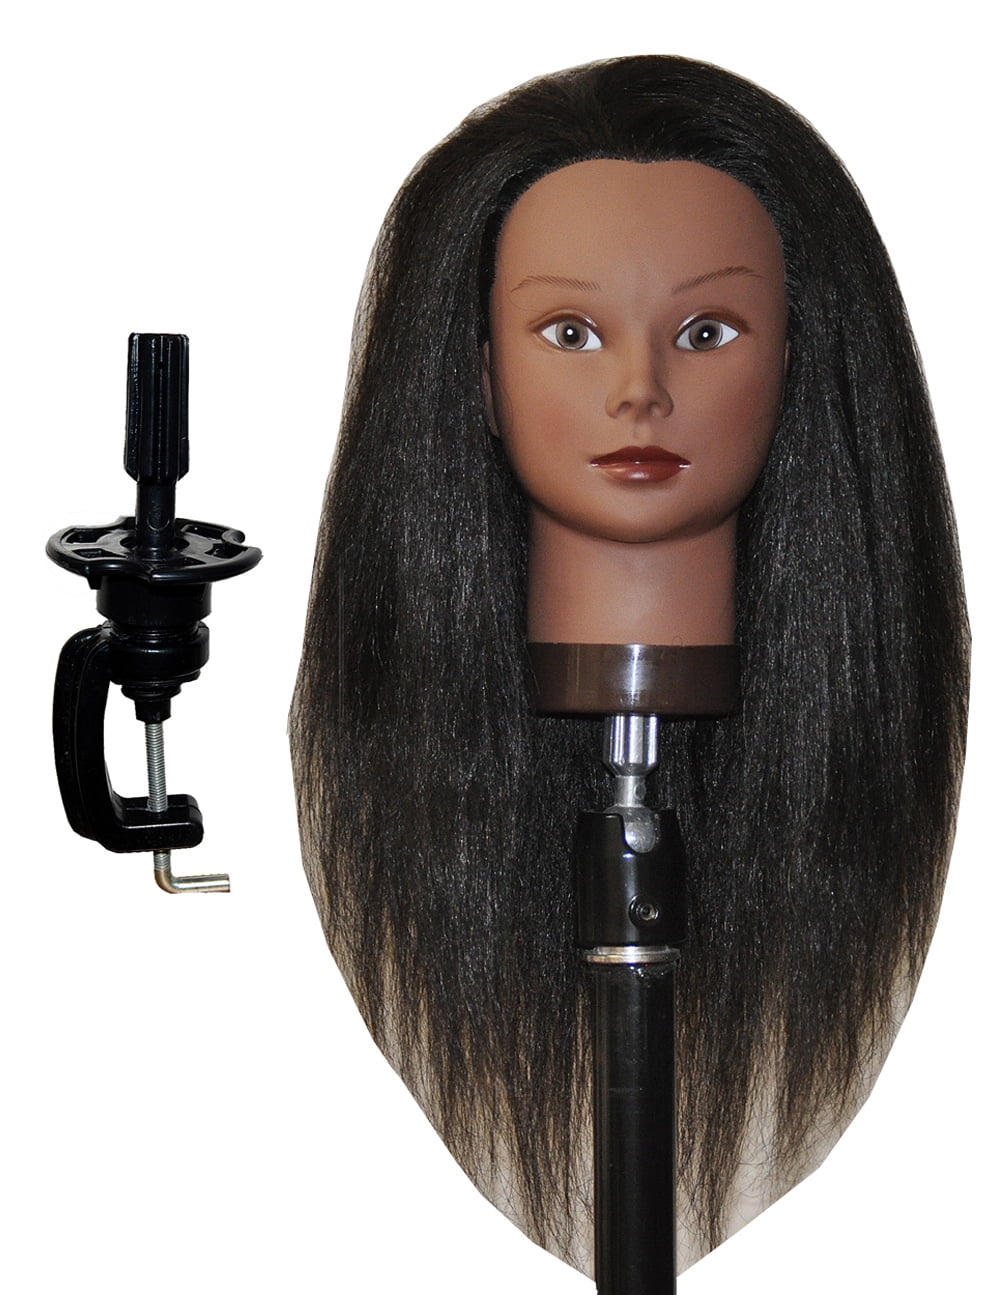  A FIR TPE Doll Head with Mouth,7.1 inches，Have a Beautiful Wig,  Eyes, Makeup，Available M16 Articulation Fixed Connection，Mannequin Head,  Hairstyle Training Head，Beauty Doll Head : Toys & Games